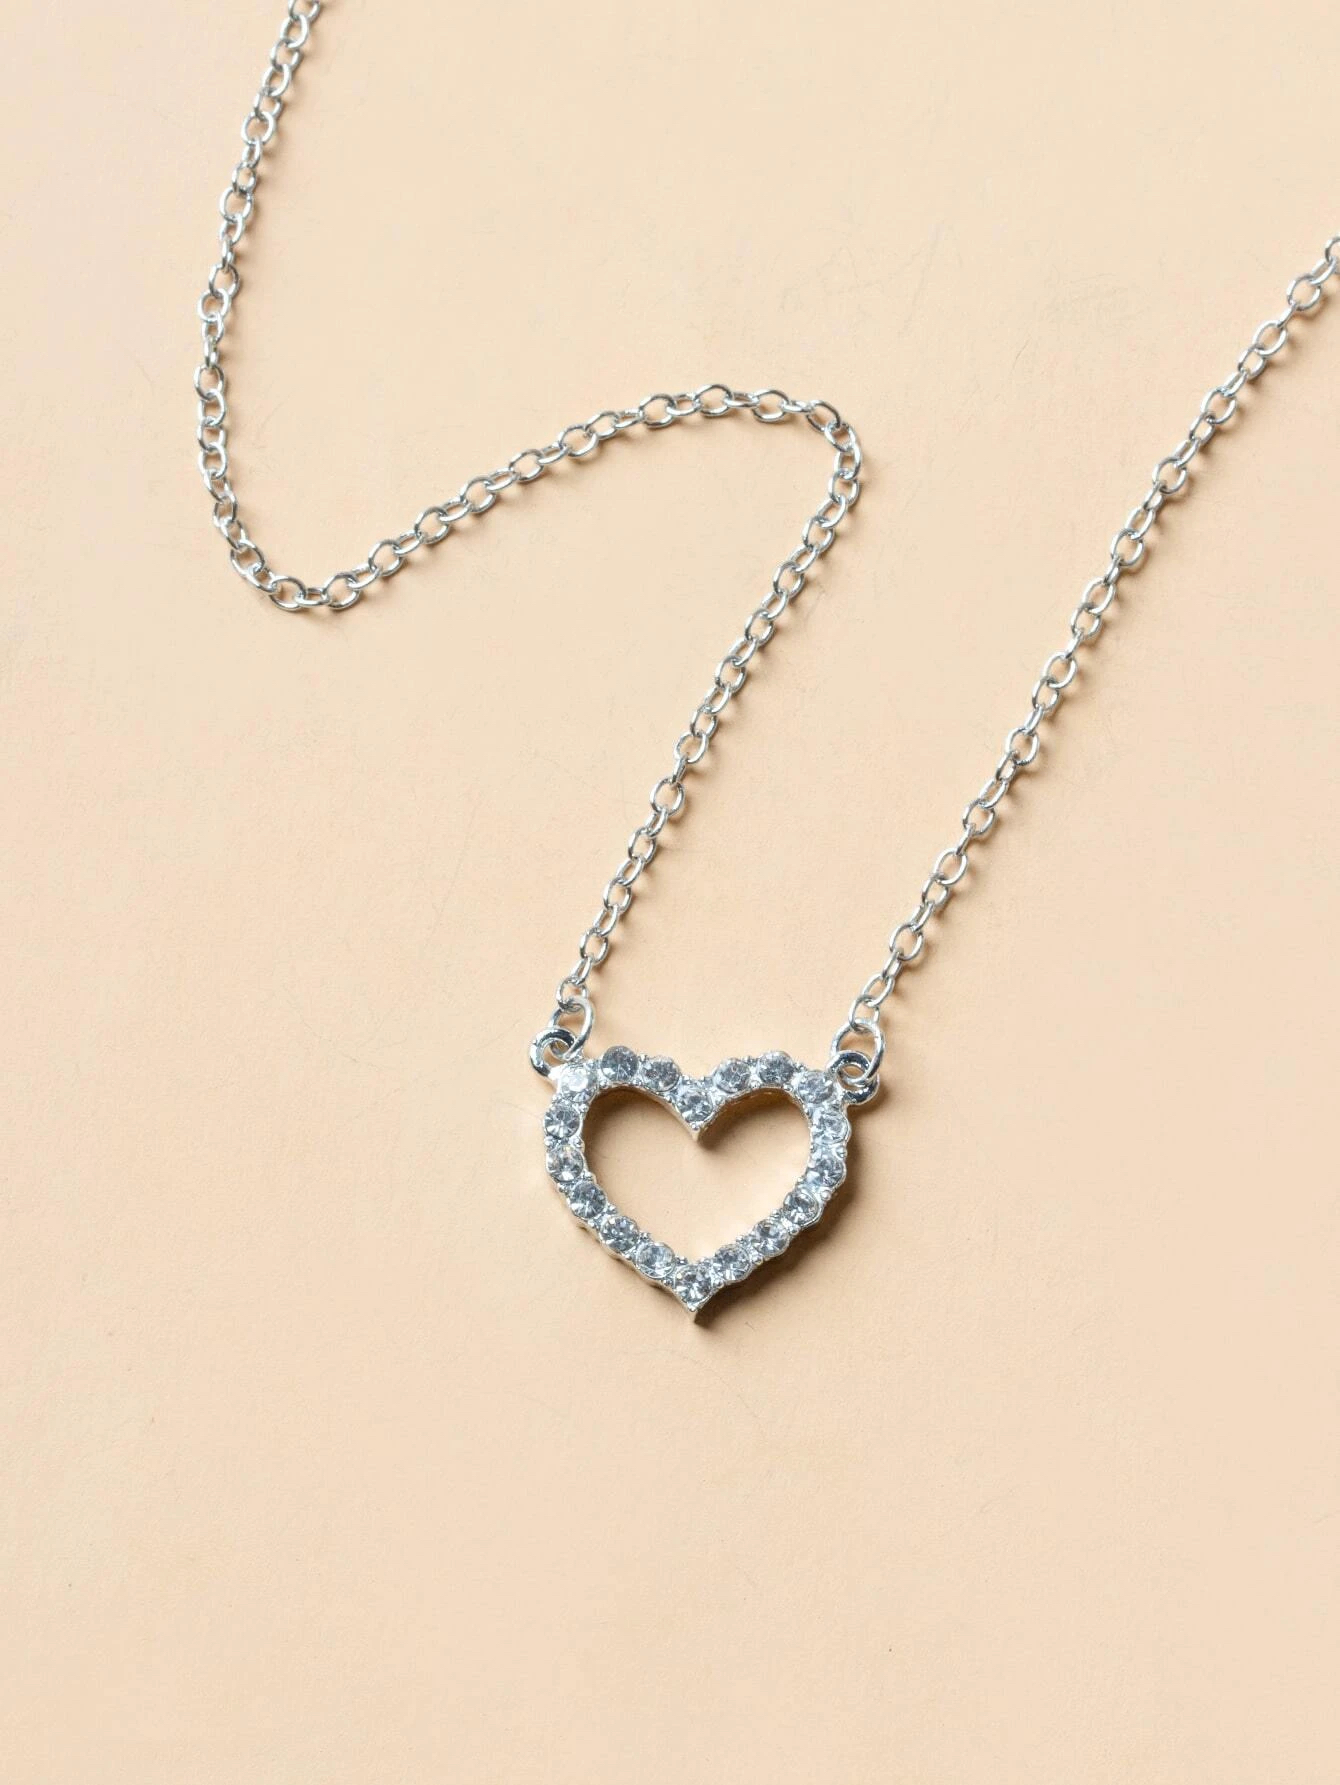 50x Love Heart Necklaces Jewellery on Silver Chain